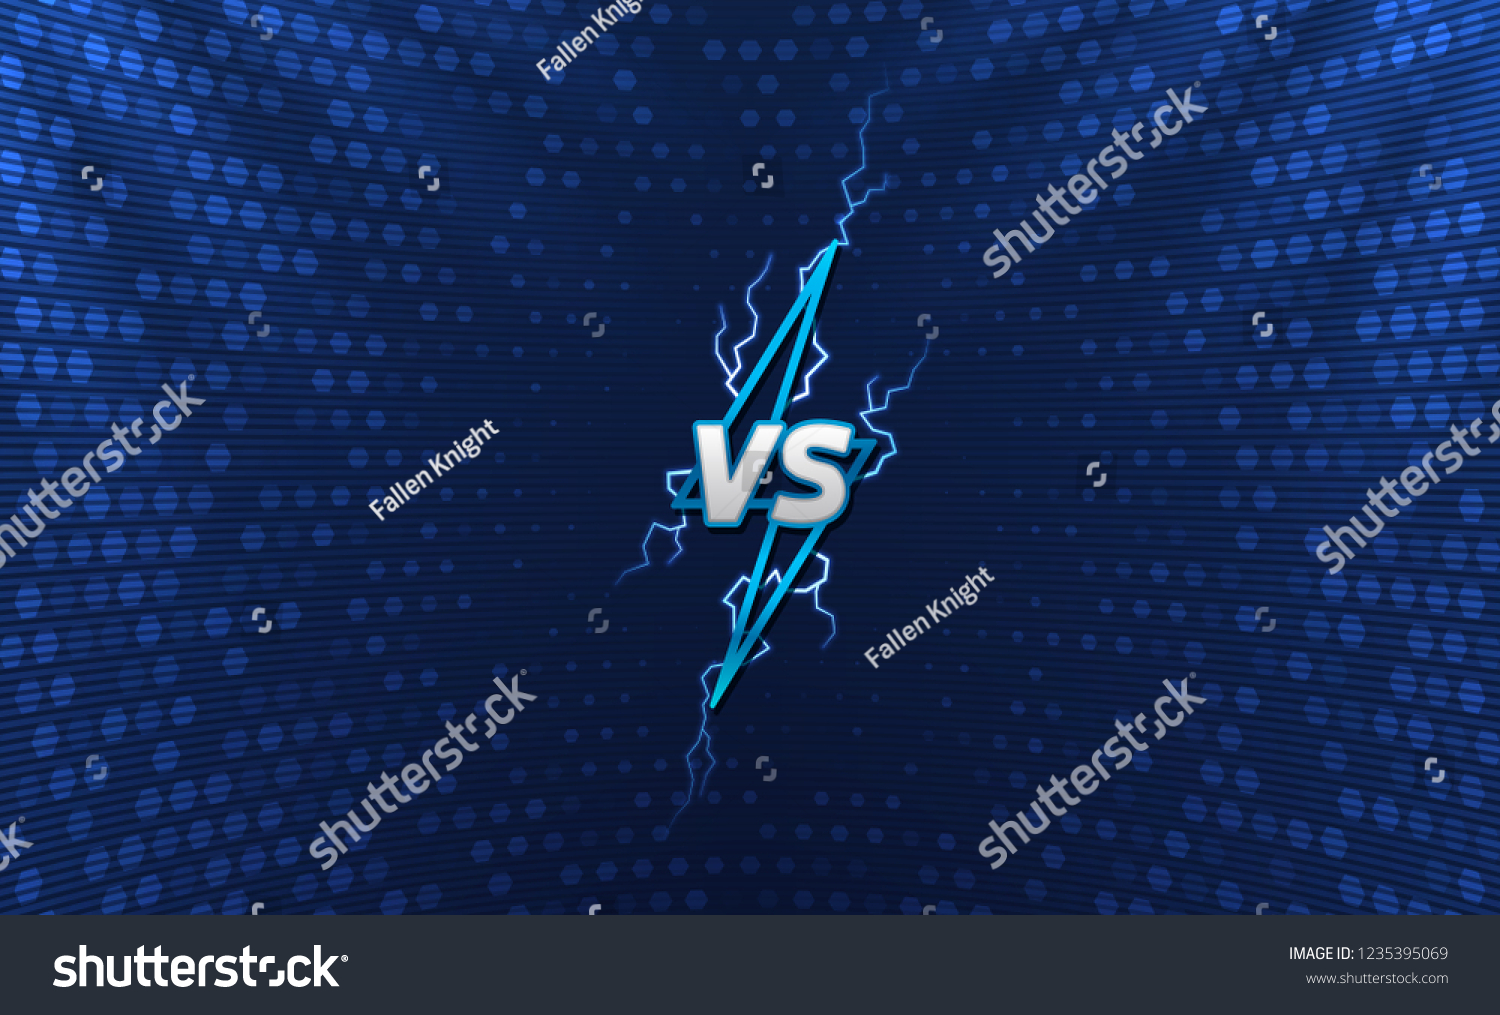 SVG of Versus logo with holographic background. Lightning logo with flashes. Cyber sport tournament screen design. Eps10 vector svg